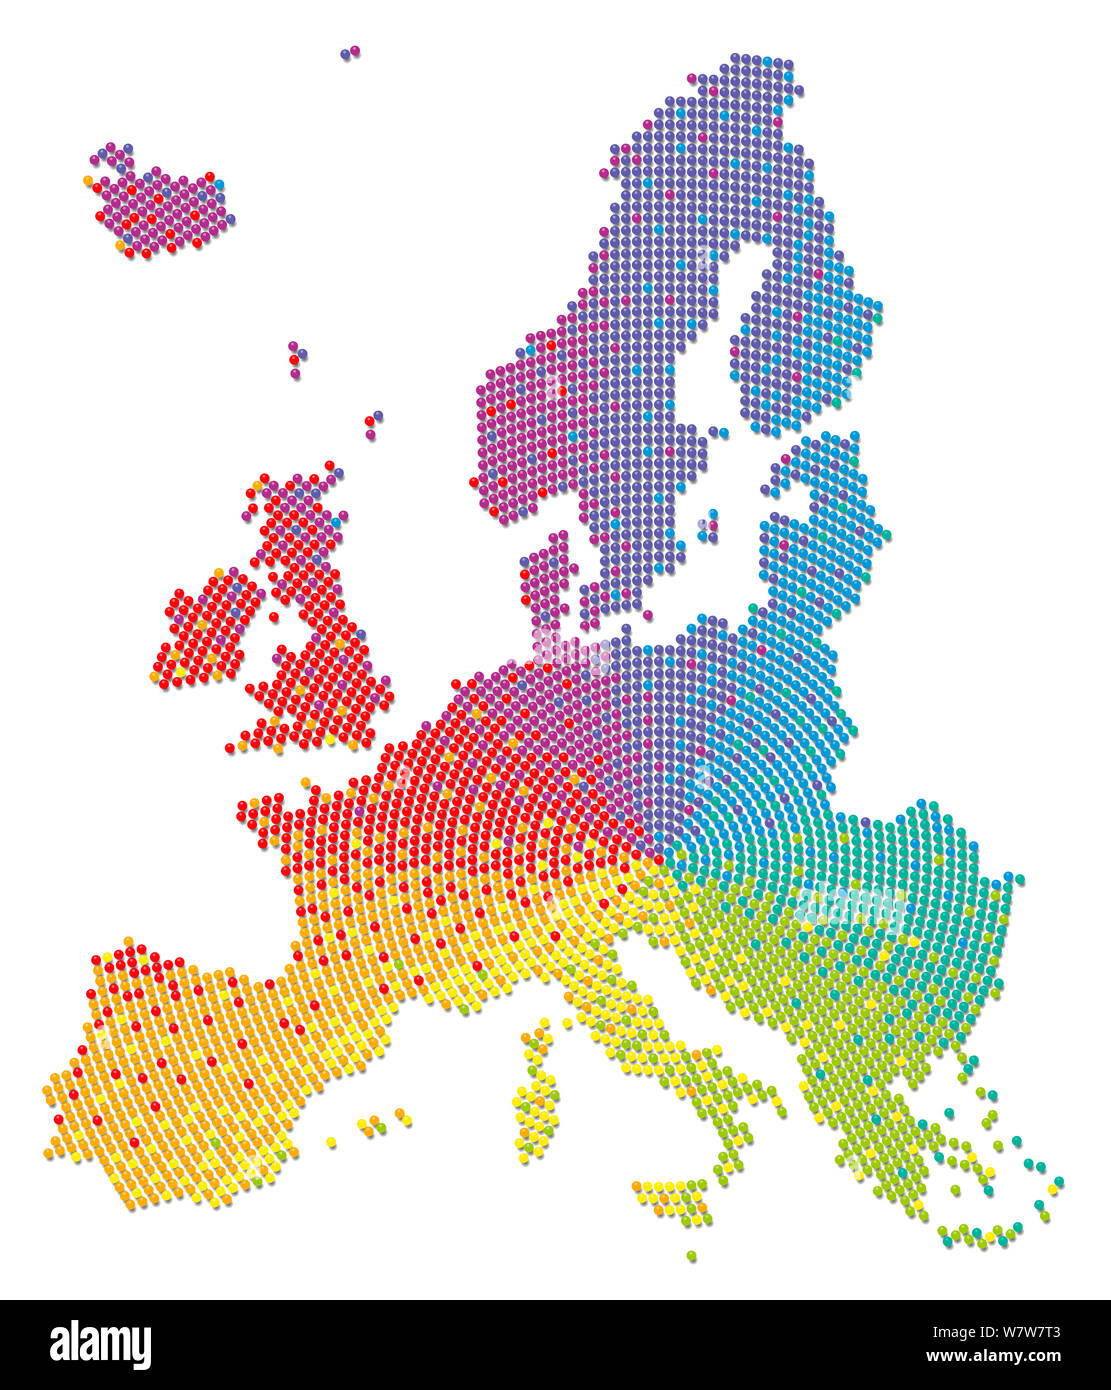 Rainbow colored Europe map. Symbol for a multicultural, tolerant, liberal, social and colorful organization - and for diversity, equality, integration Stock Photo